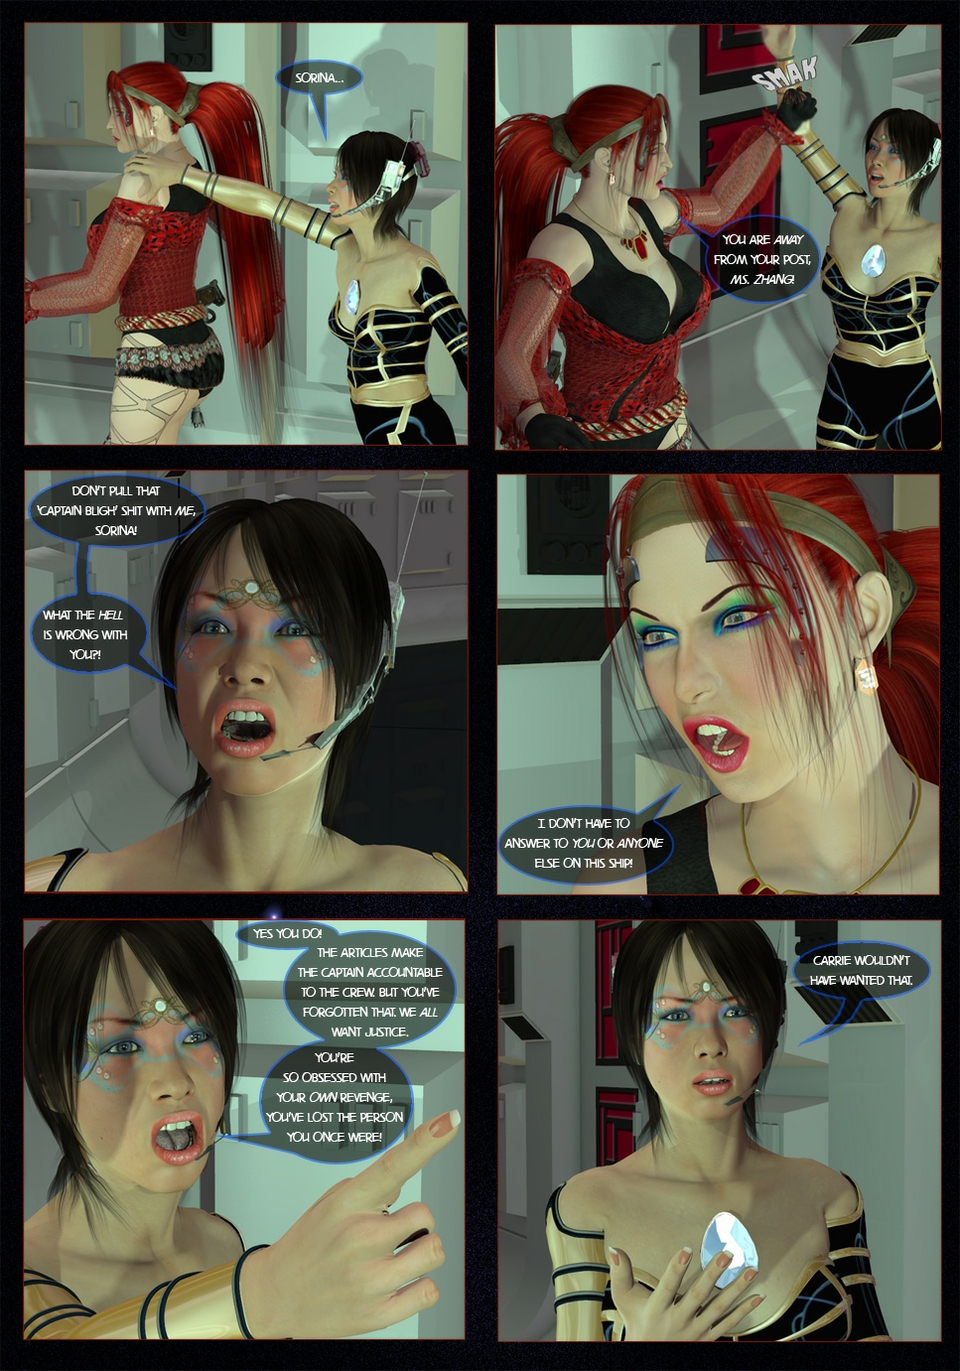 Voyage of the Proken Promise - Issue 8, Page 4 - Obsession is Ugly